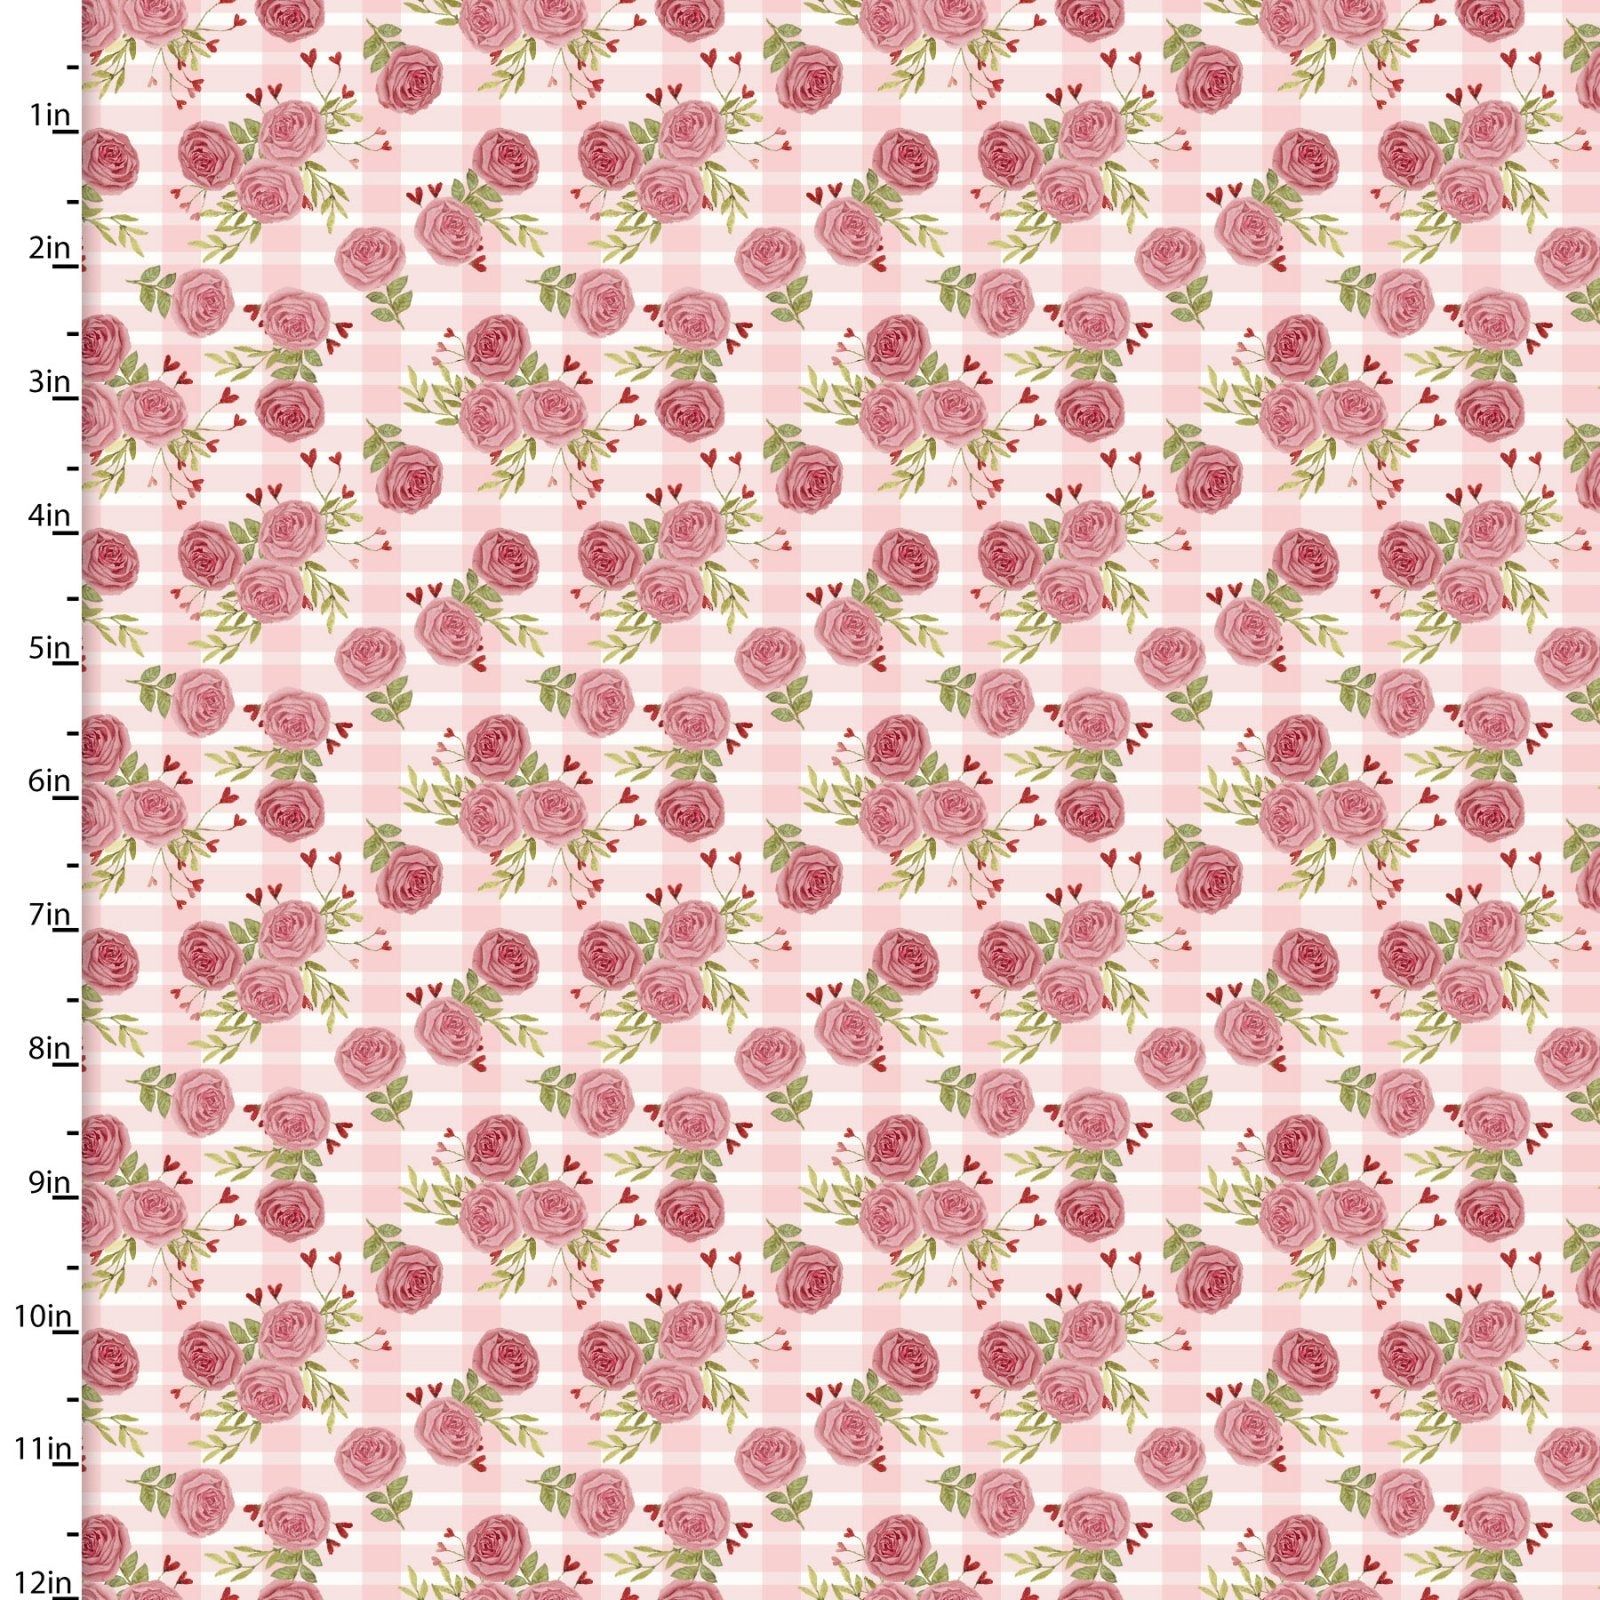 Pink and white gingham with deep pink roses and little red hearts growing out of the leaves 100% cotton fabric - Hugs Kisses by 3 Wishes